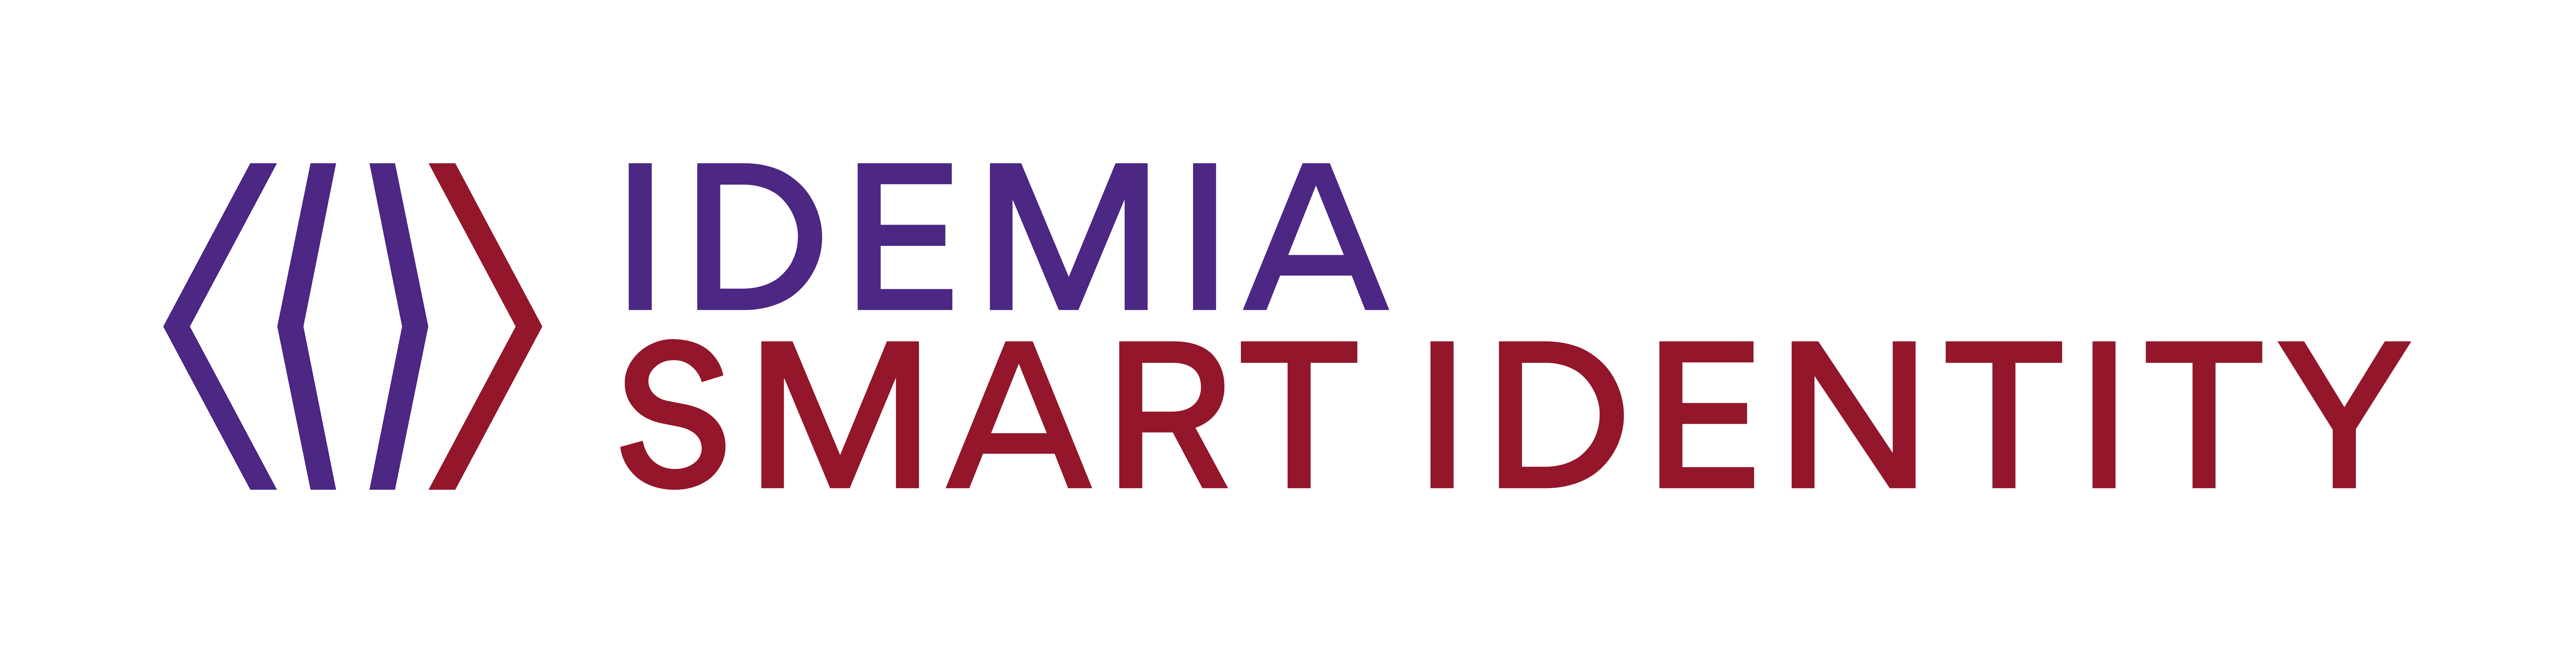 Nigeria to receive one of the world’s most powerful biometric systems from IDEMIA Smart Identity